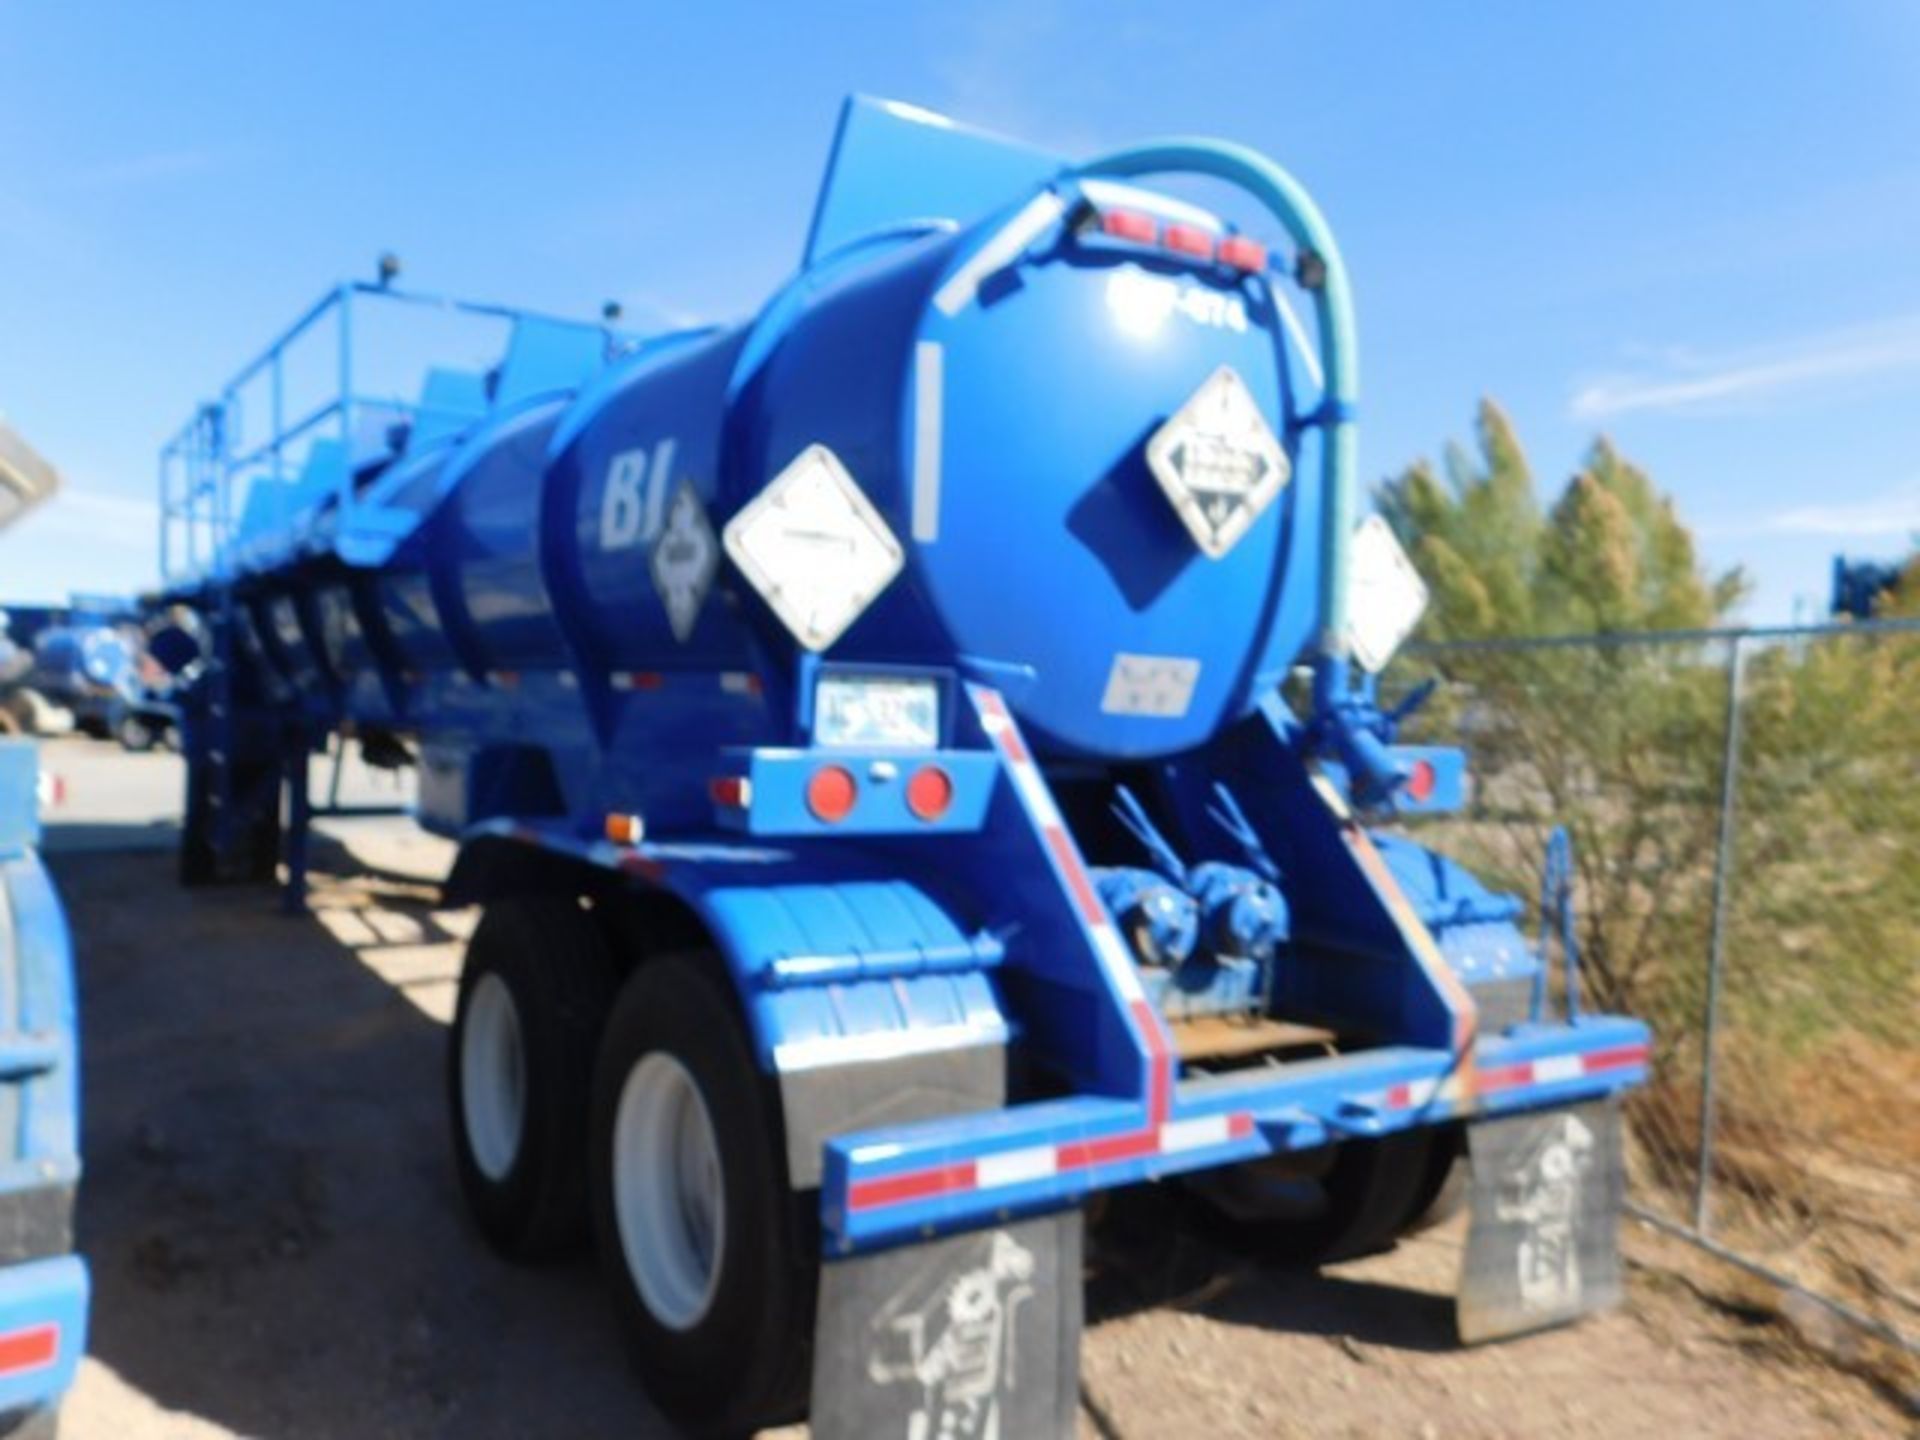 Located in YARD 2 - Odessa, TX (ATF074) (X) 2011 WORLEY MACHINE WORKS 5000 GAL (3) COMPARTMENT - Image 8 of 8